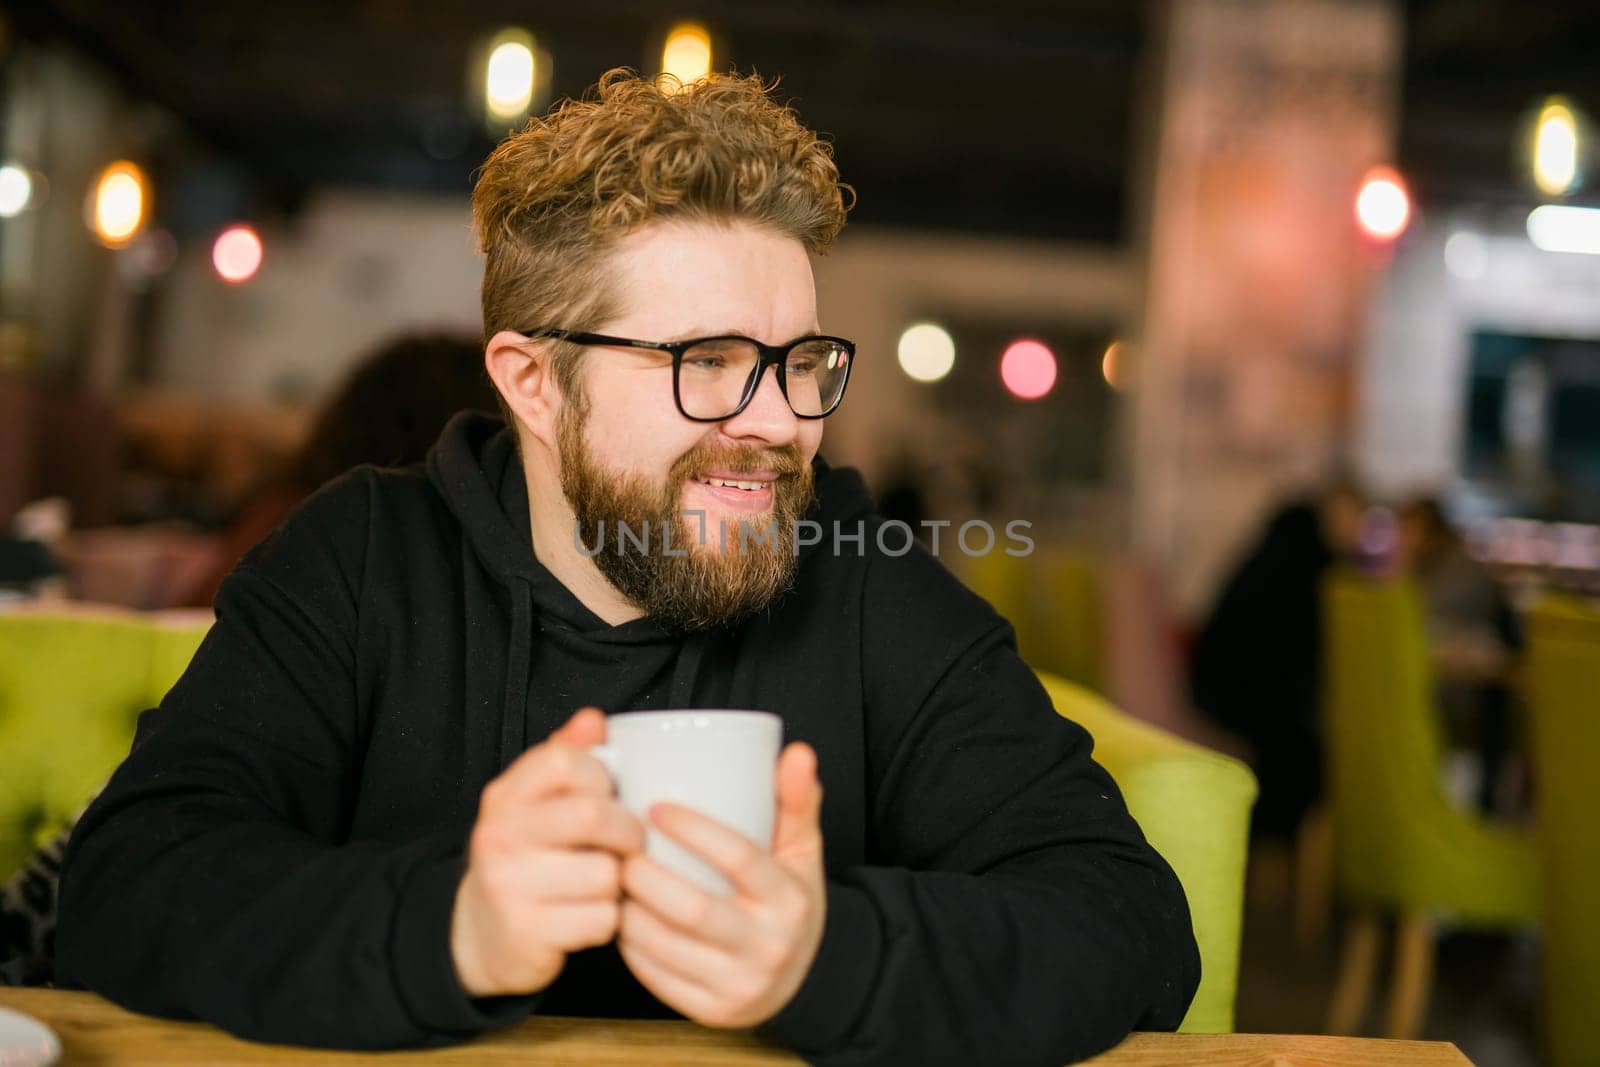 Bearded curly man smiling confident drinking coffee in restaurant or coffee shop. Millennial generation and Gen Y by Satura86